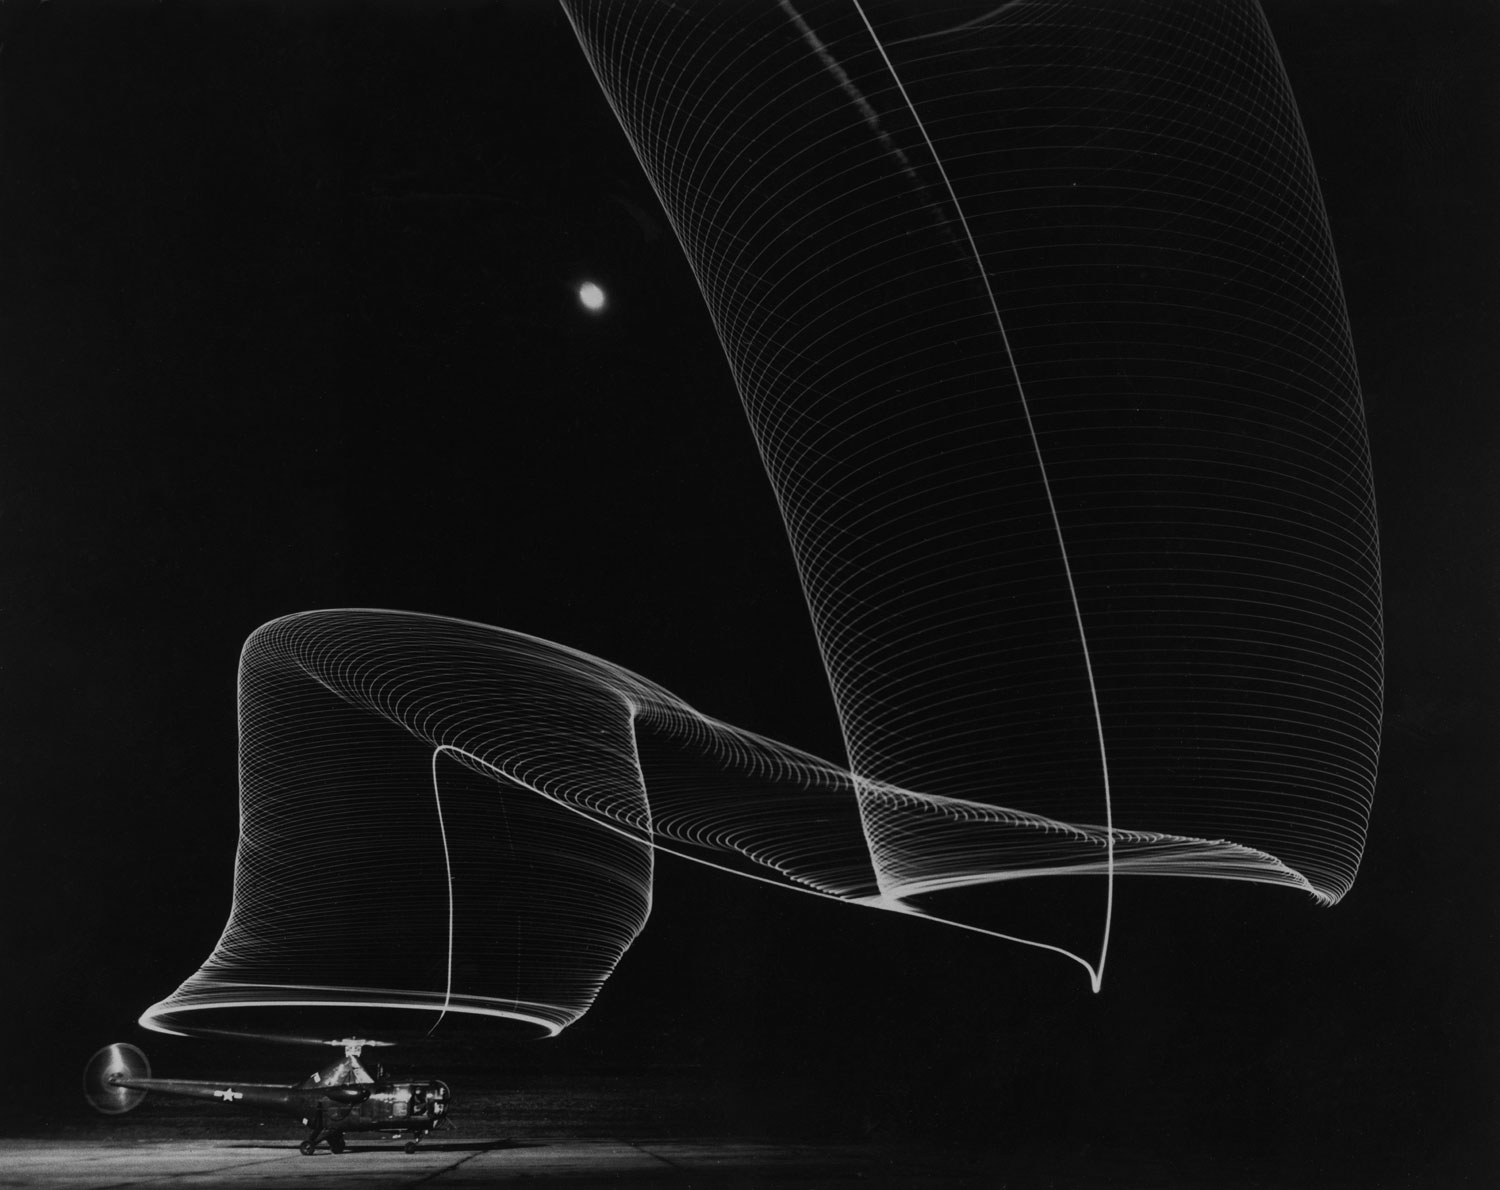 Slinky-like light pattern in the blackness of a moonlit sky produced by a time-exposure of the light-tipped rotor blades of a grounded helicopter as it takes off, 1949.